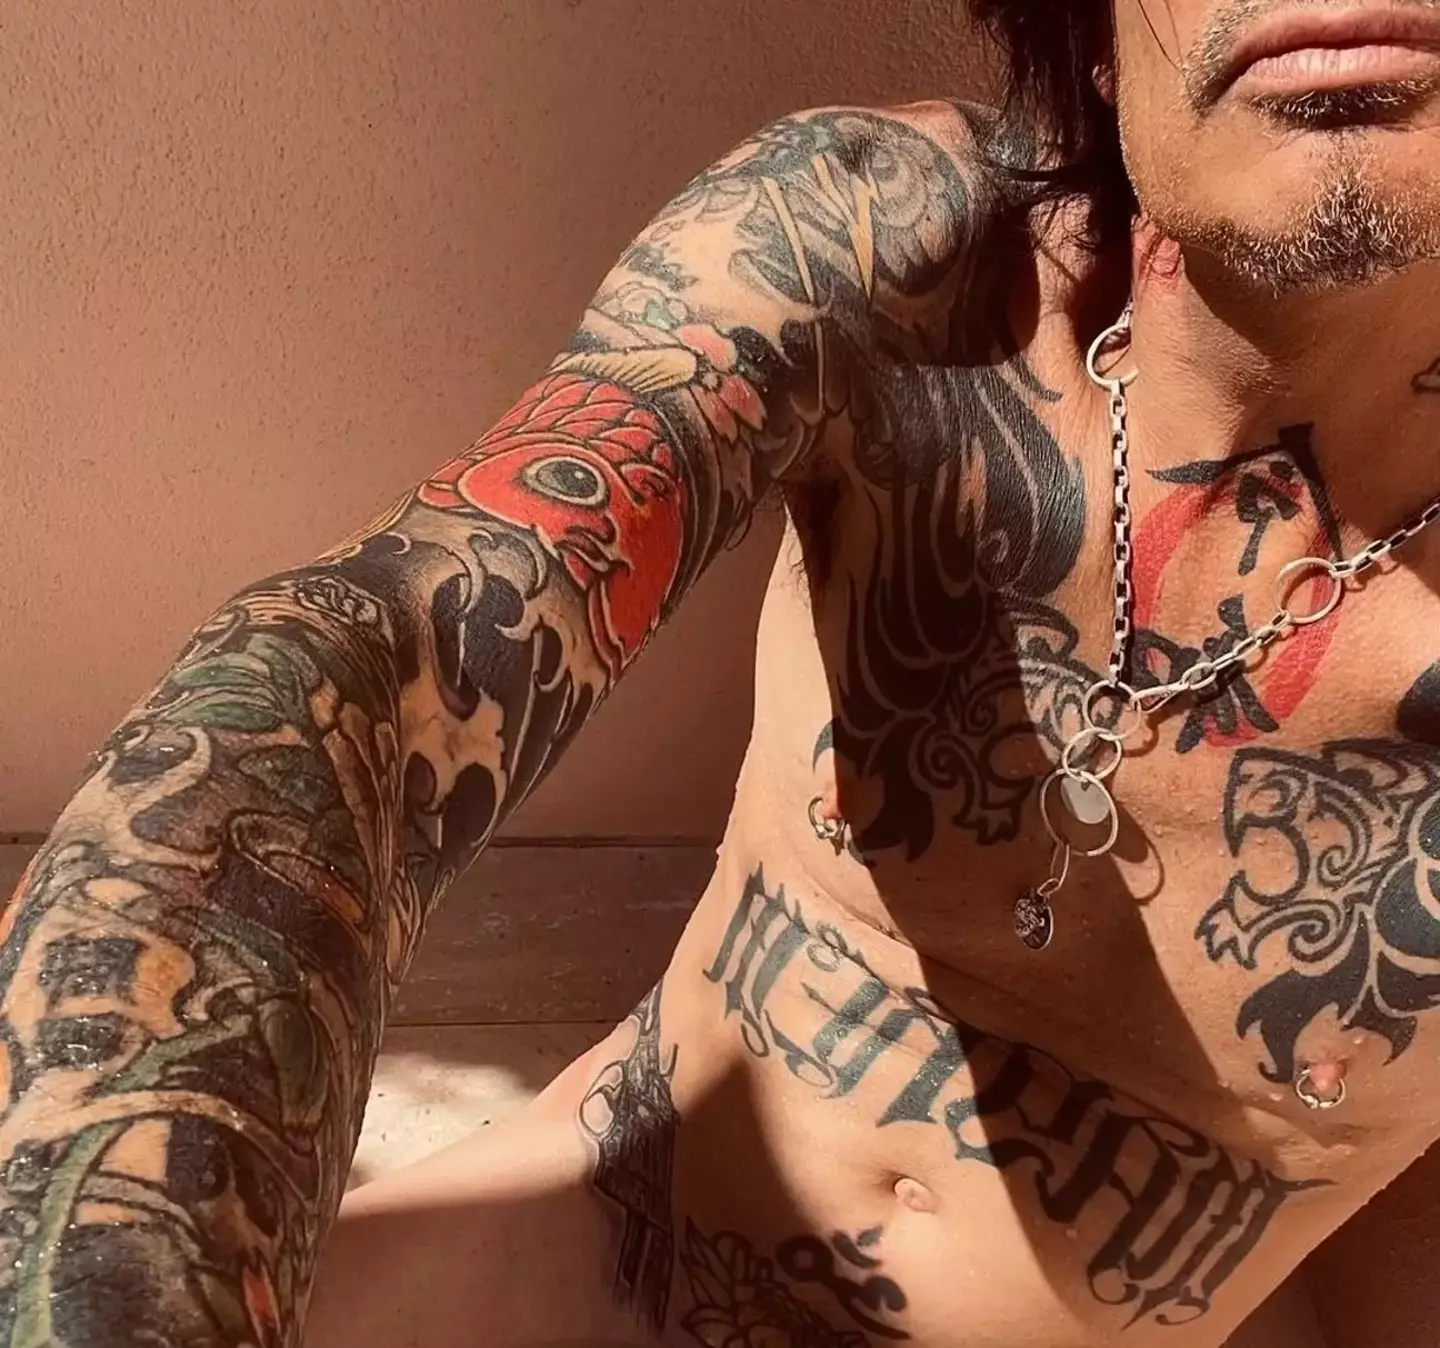 Tommy Lee shocked social media by sharing the nude on Instagram last month.